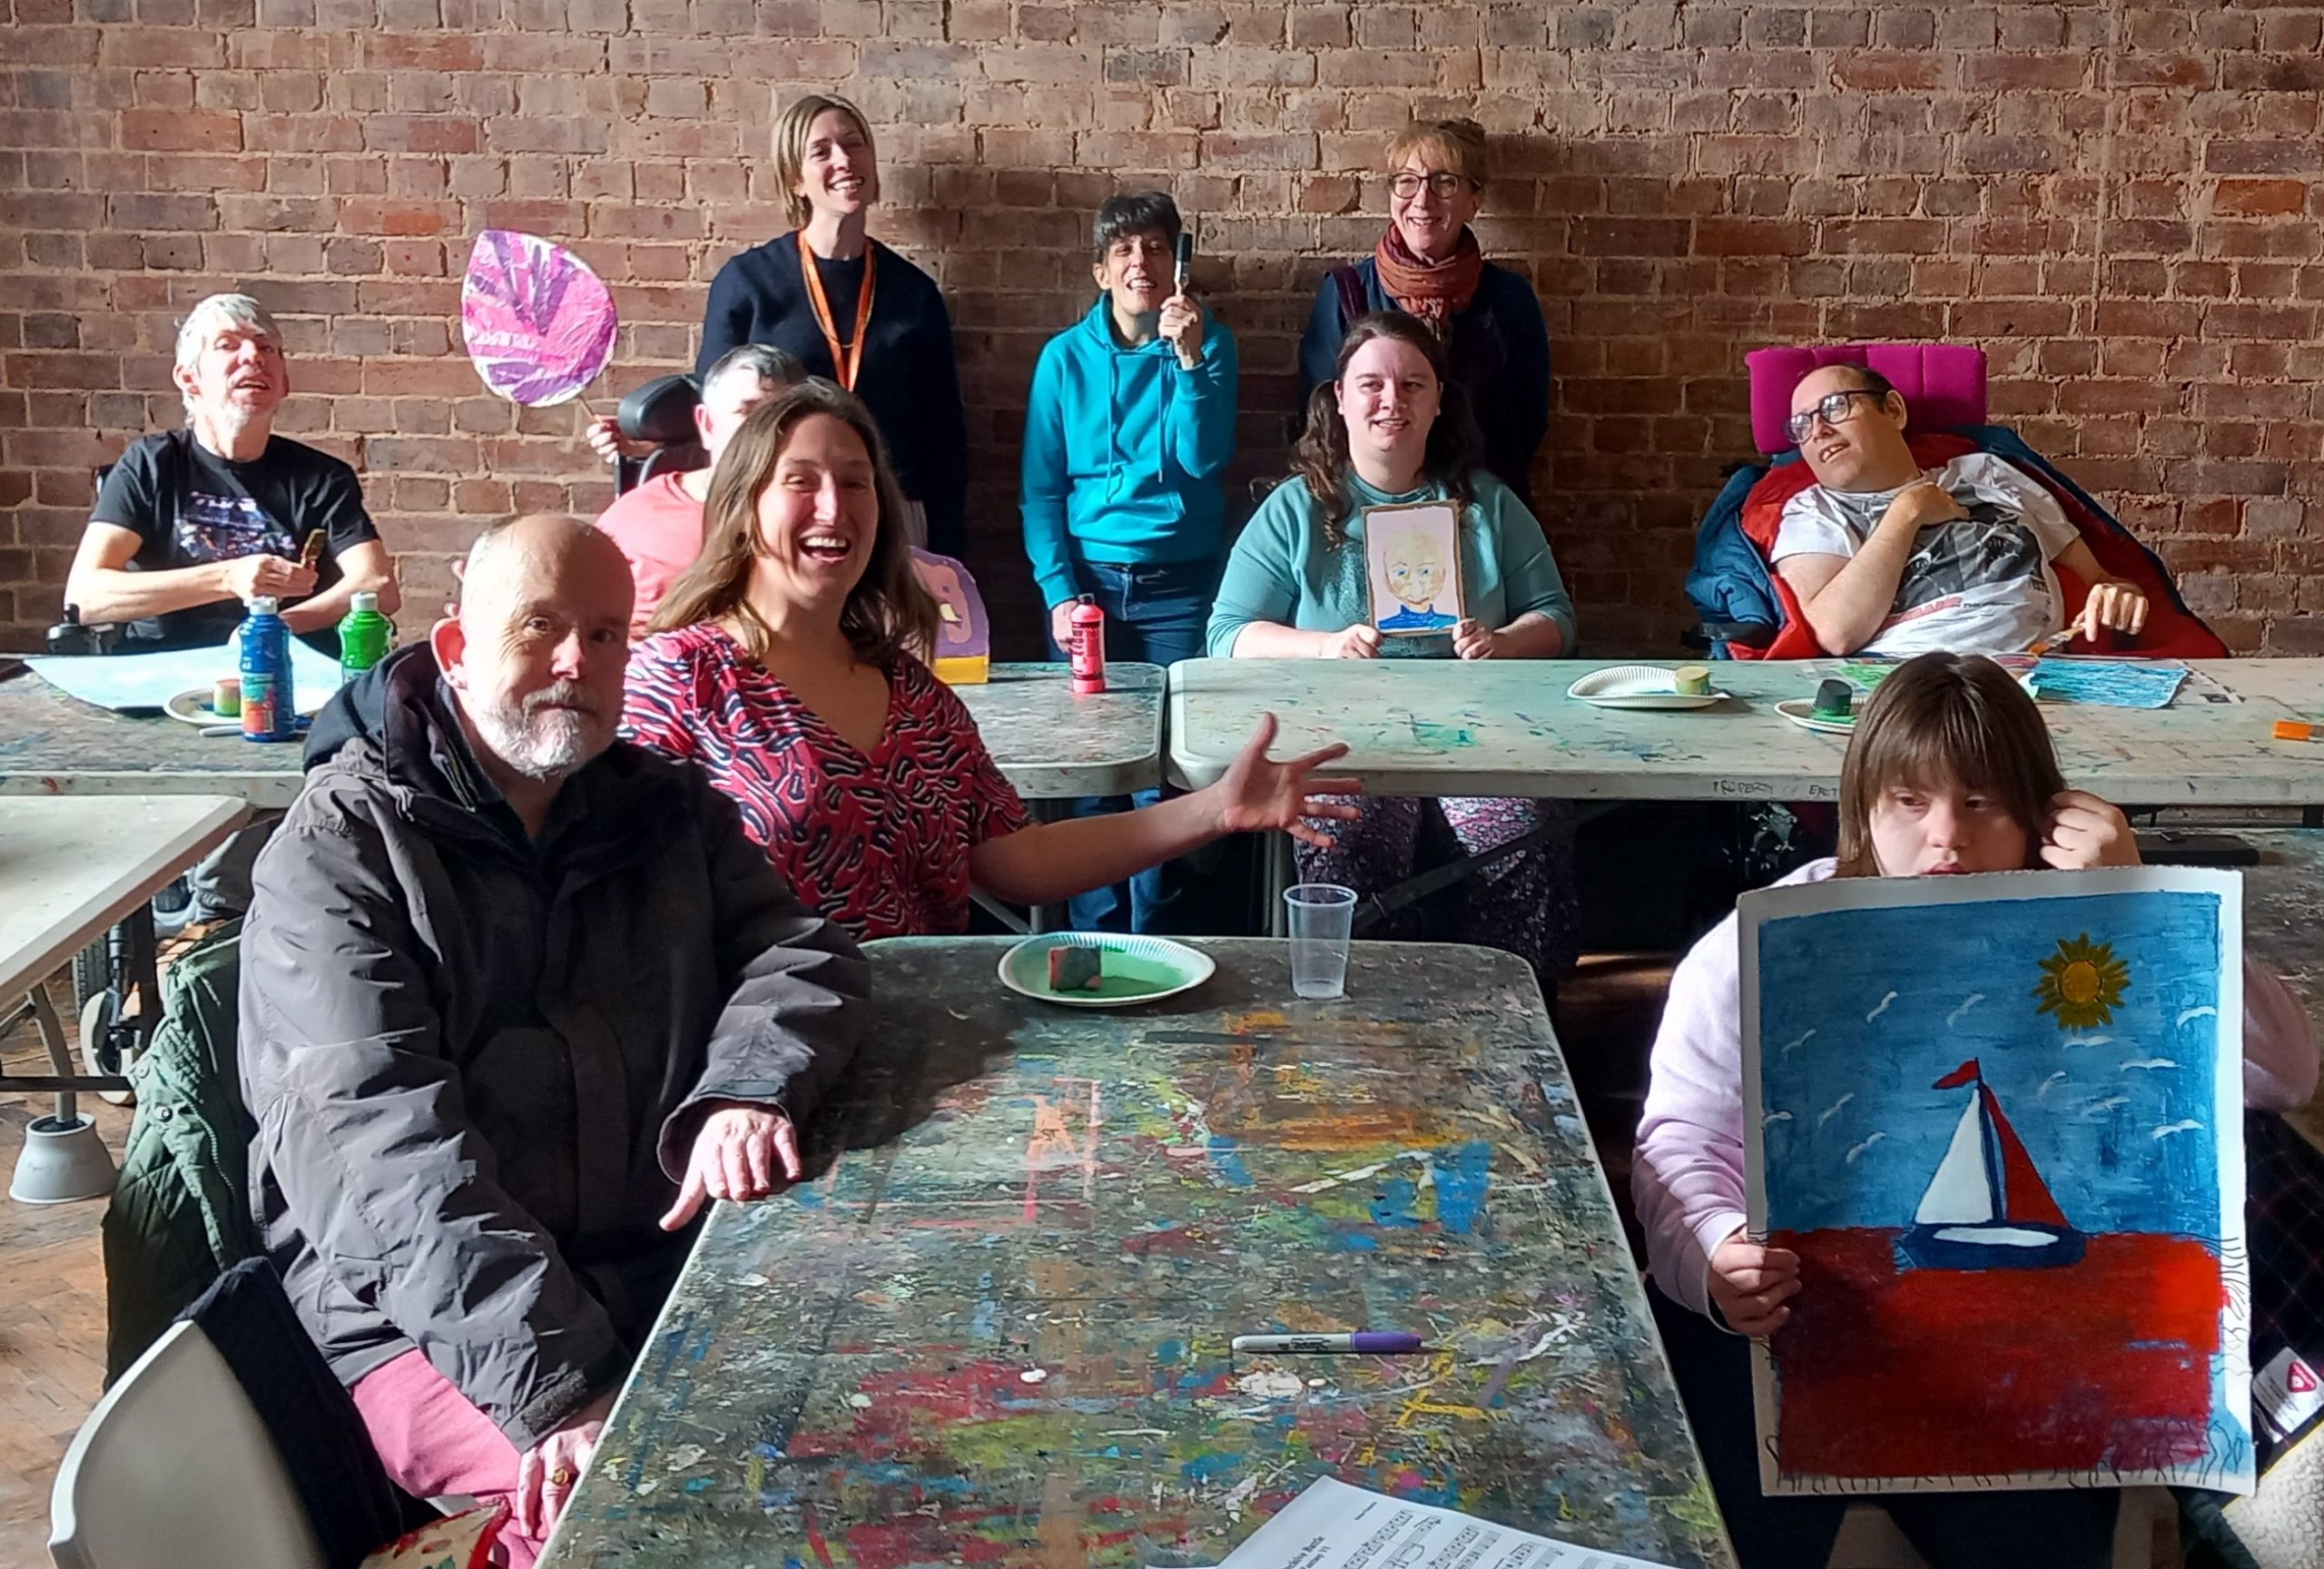 Magic Carpet to become part of Exeter Community Initiatives